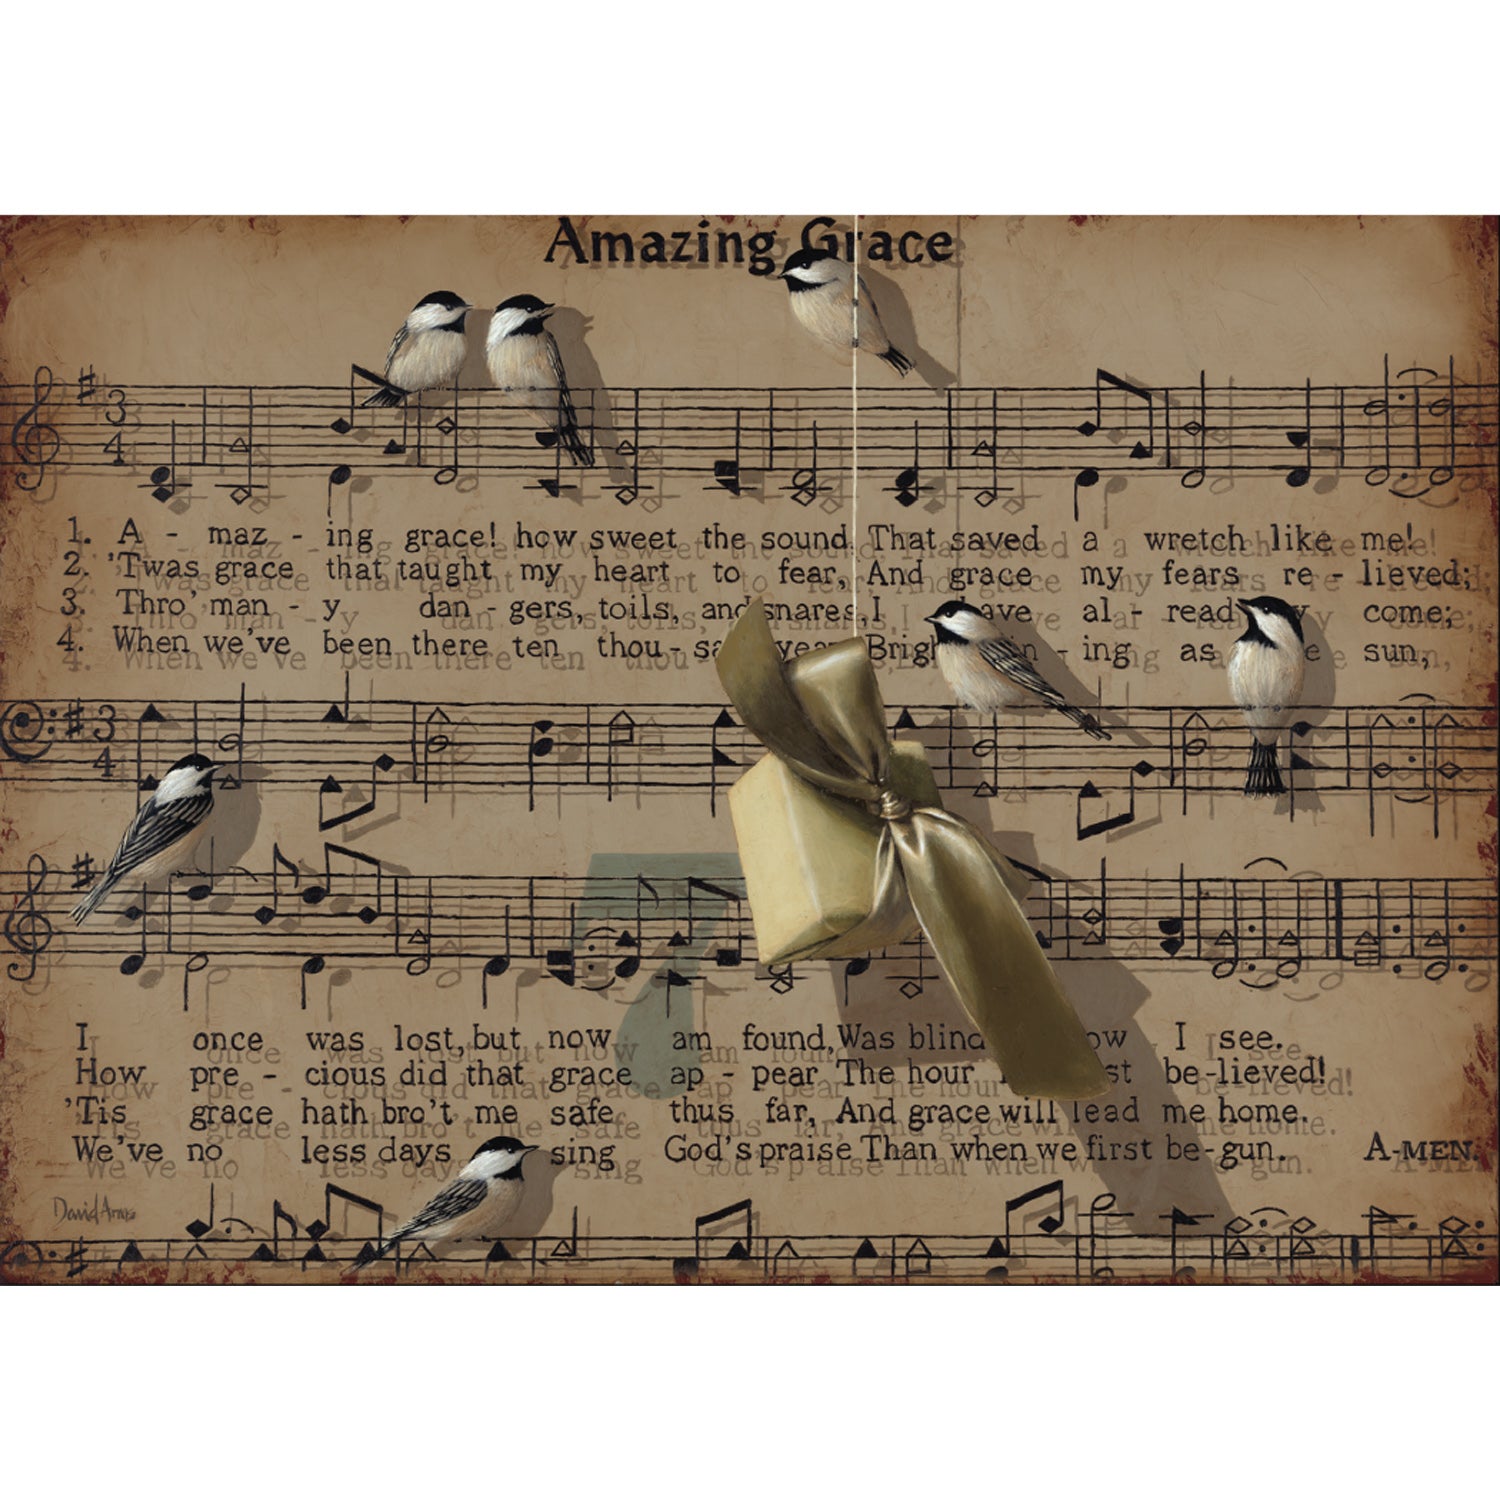 A Hester &amp; Cook sheet music with birds on it and the words &quot;Amazing Grace&quot; - a song filled with God&